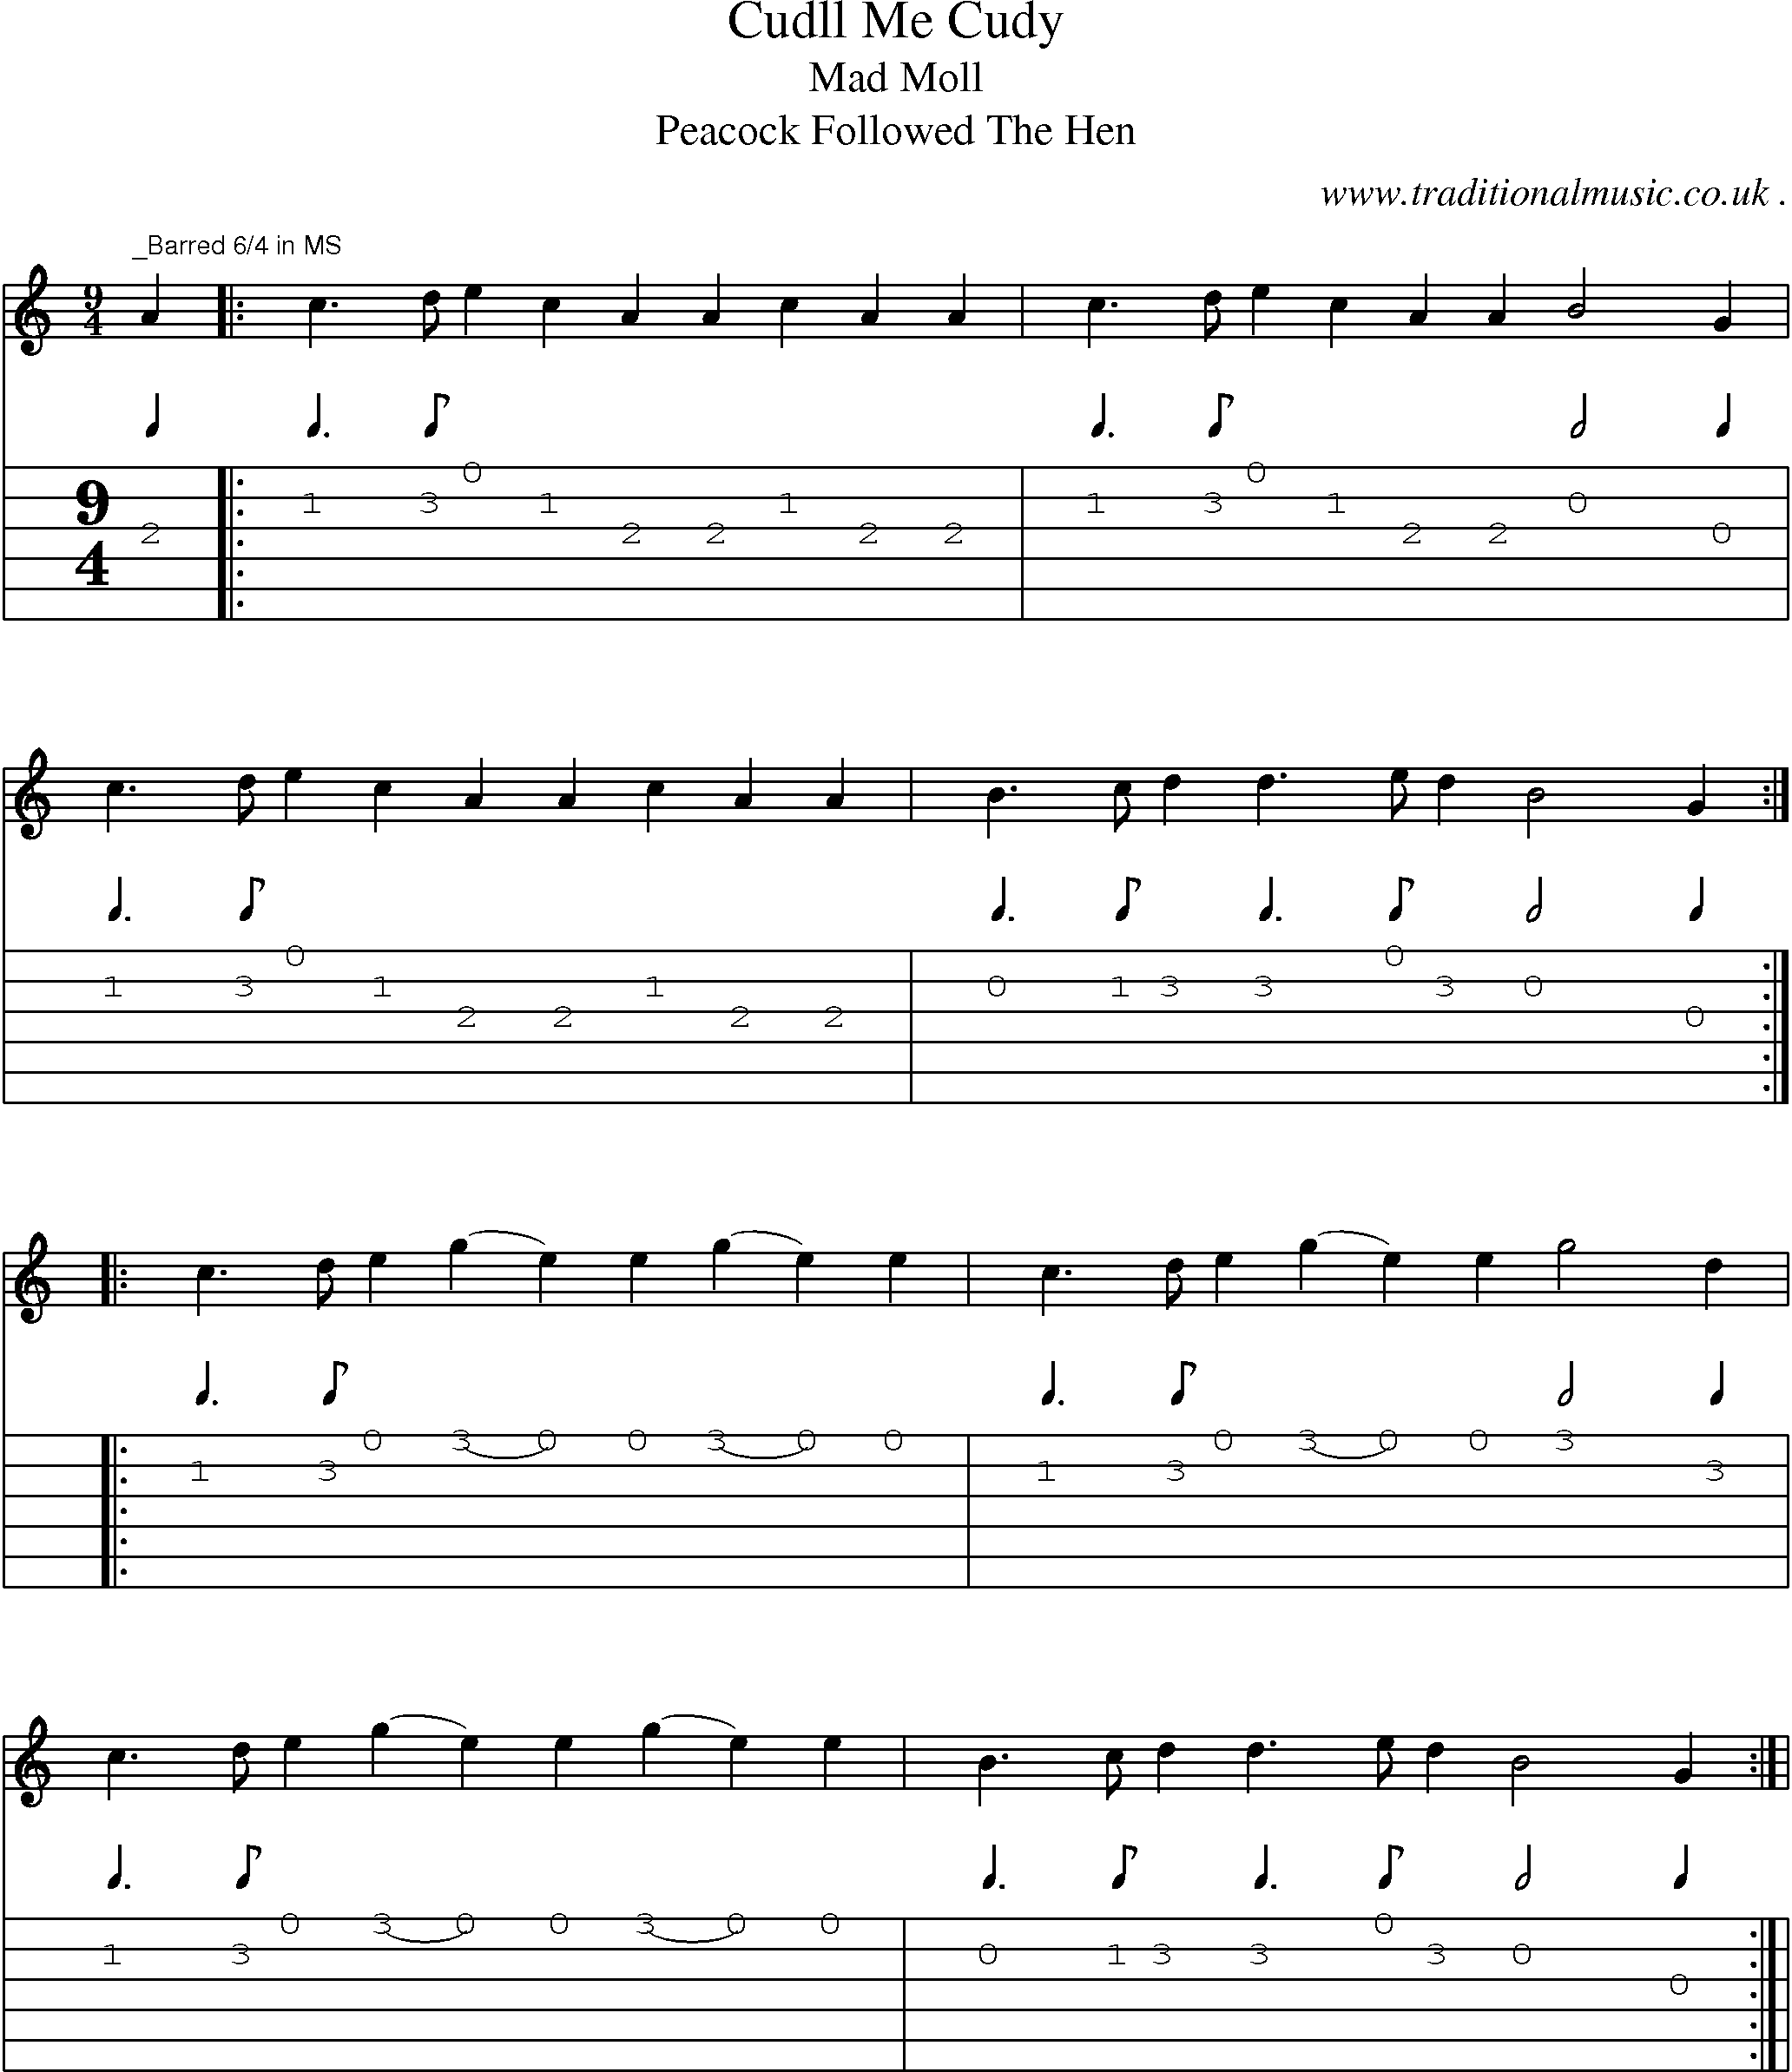 Sheet-Music and Guitar Tabs for Cudll Me Cudy